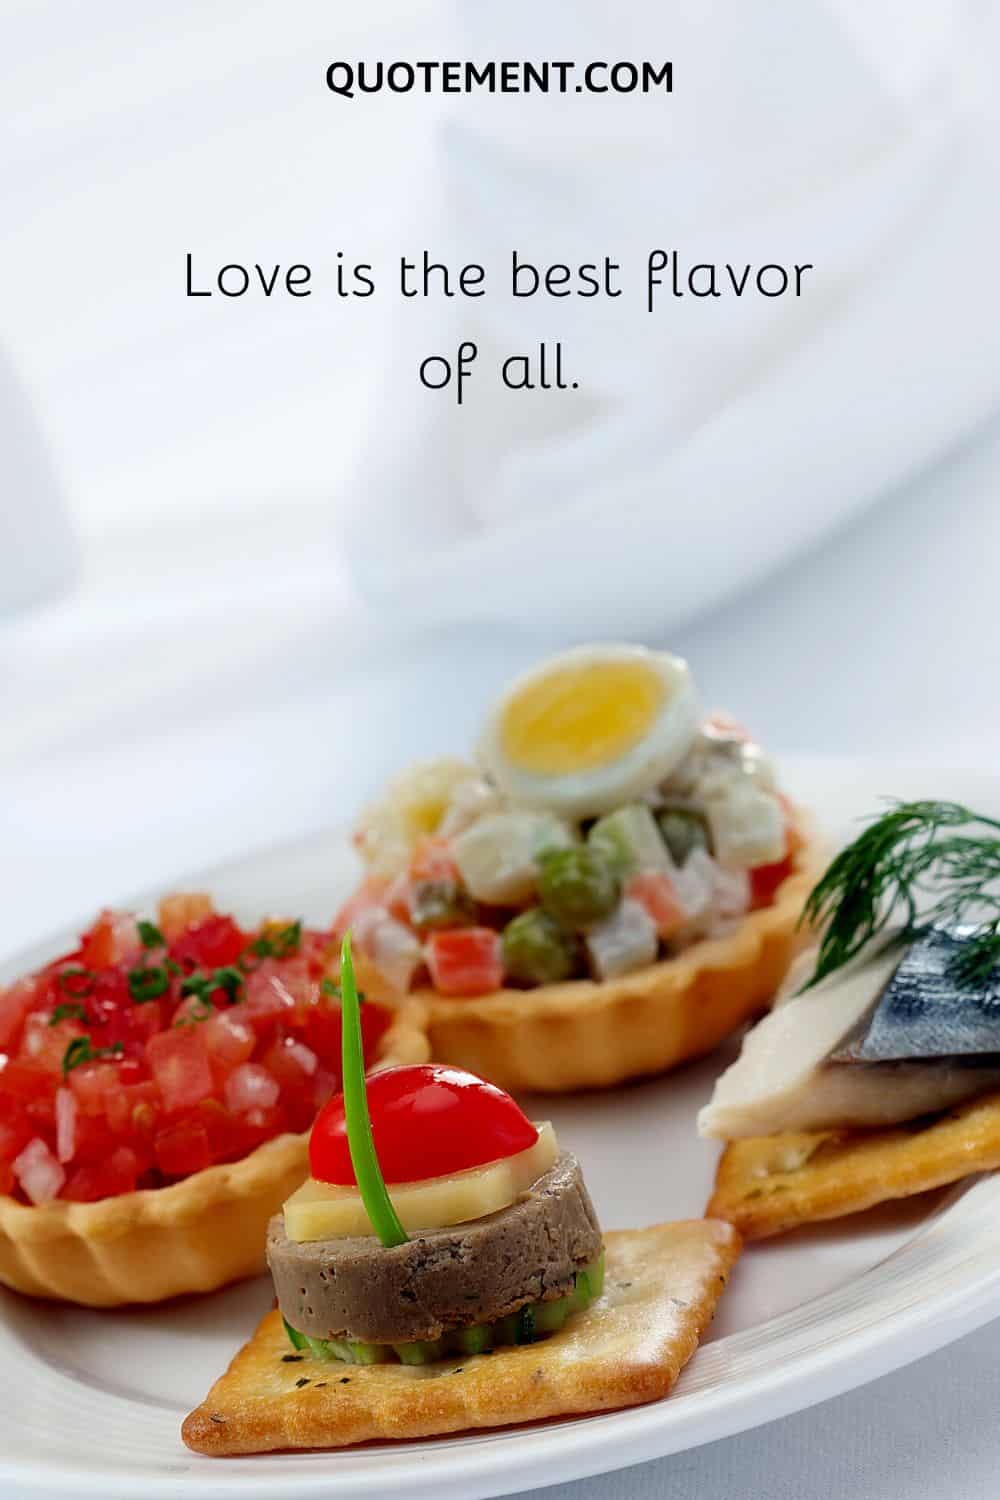 Love is the best flavor of all.